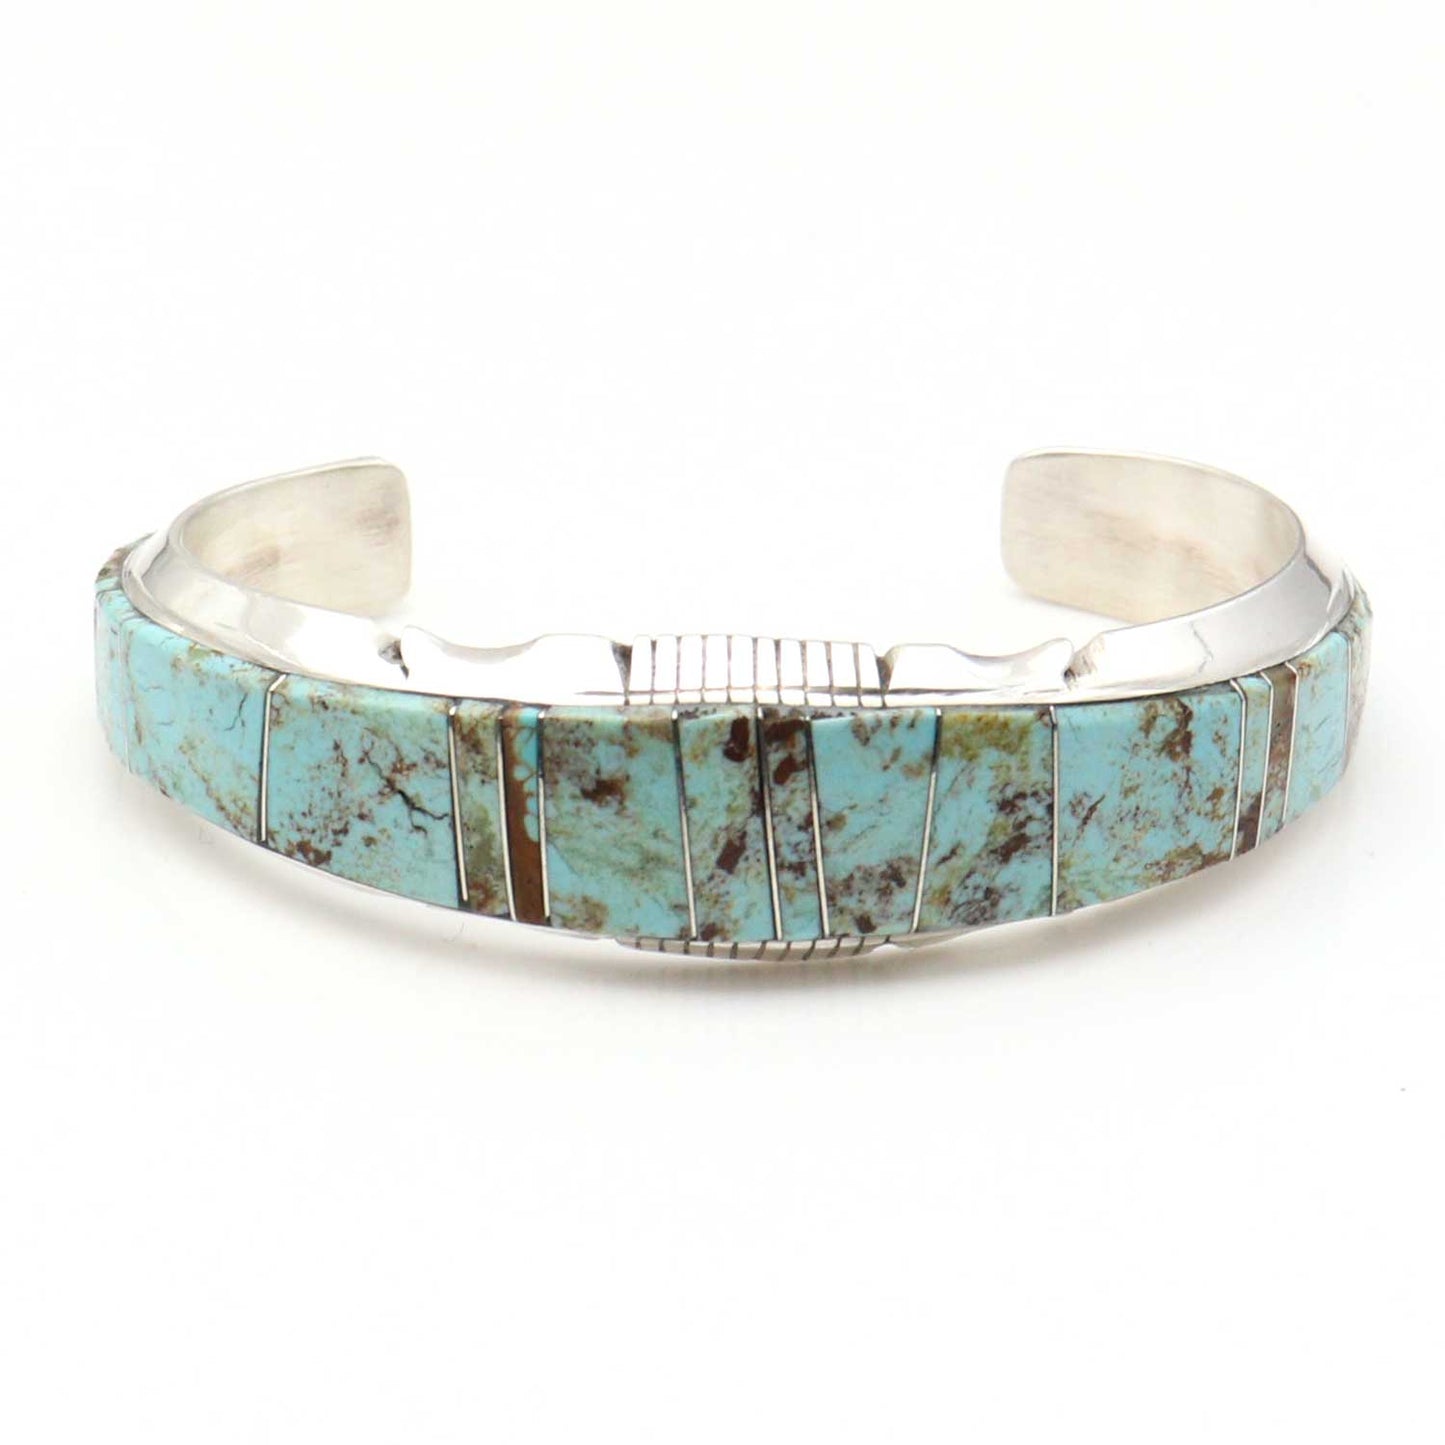 Number 8 Turquoise Inlaid Bracelet by Steve Francisco